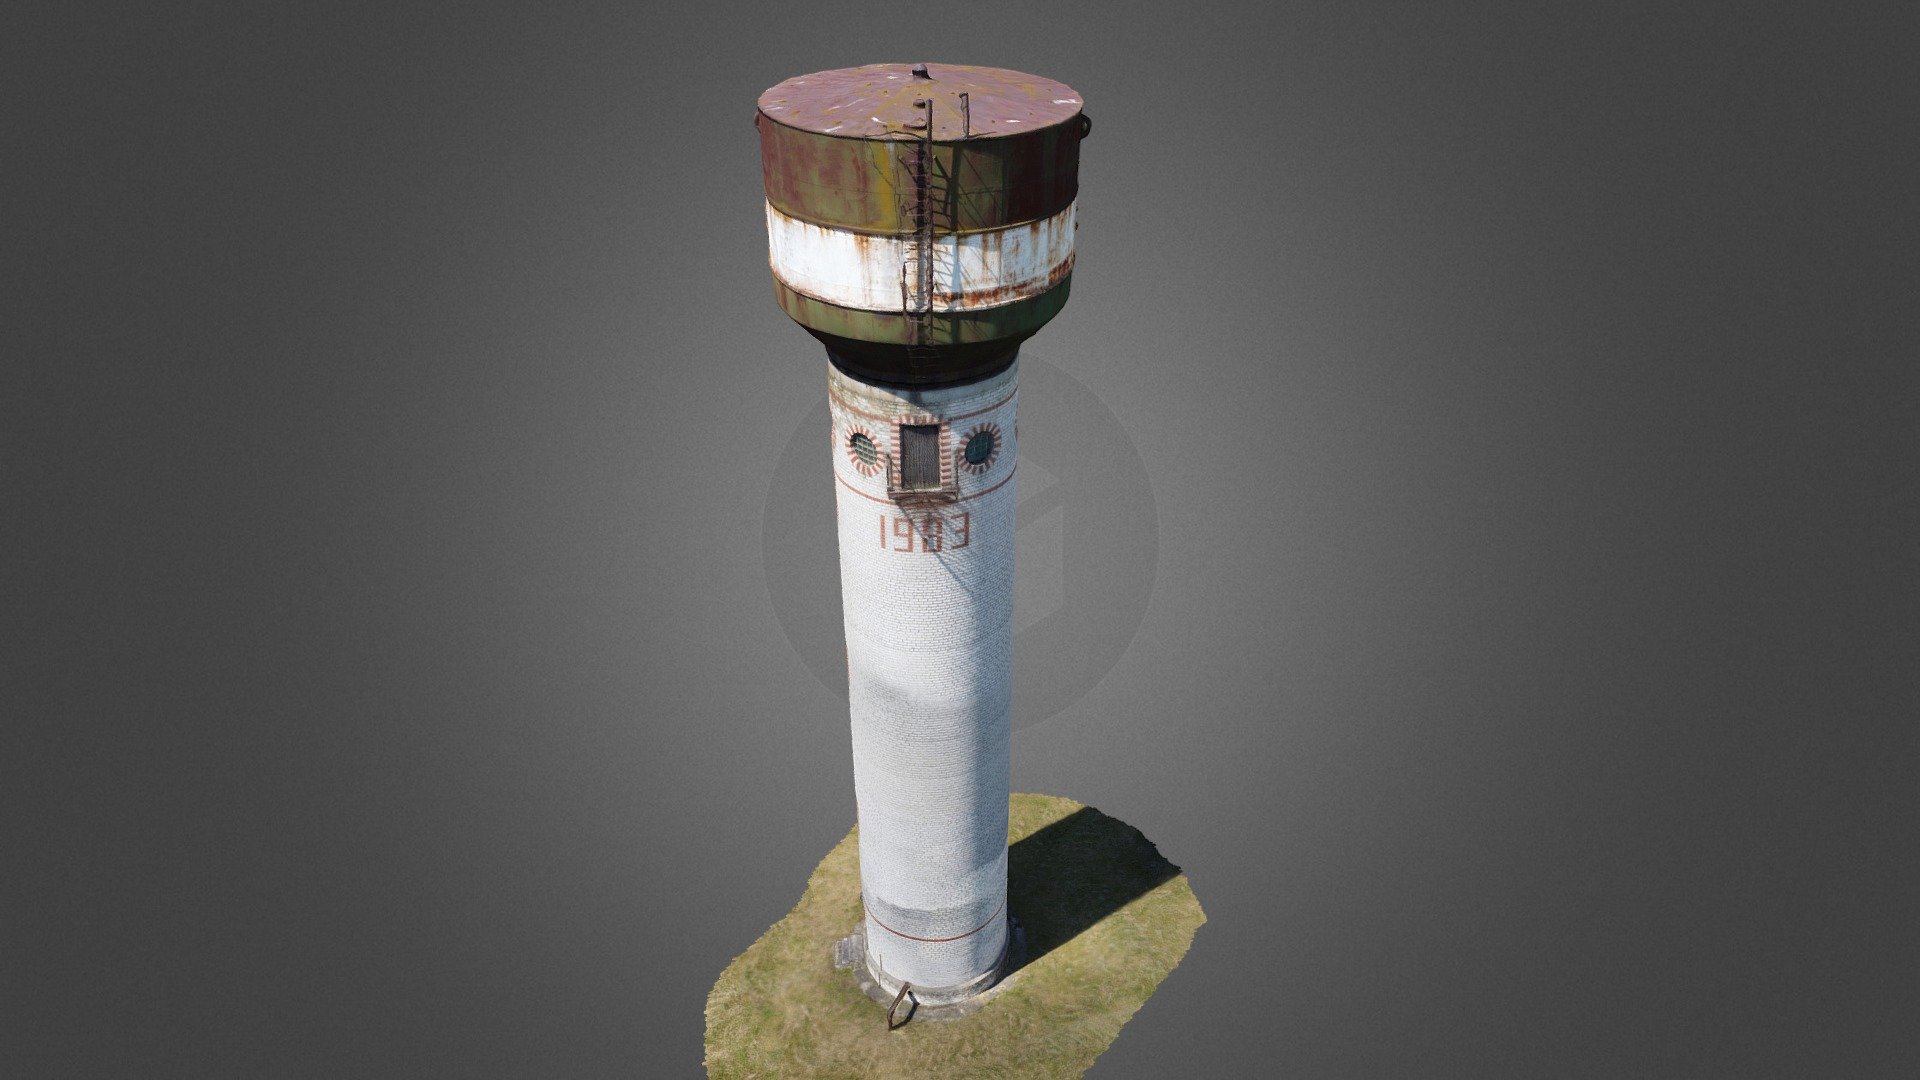 Old, abandoned soviet style water tower 3D scan.
Brick walls, rusty metal roof, USSR style windows. 
Located in Latvia, Dundaga 3d model